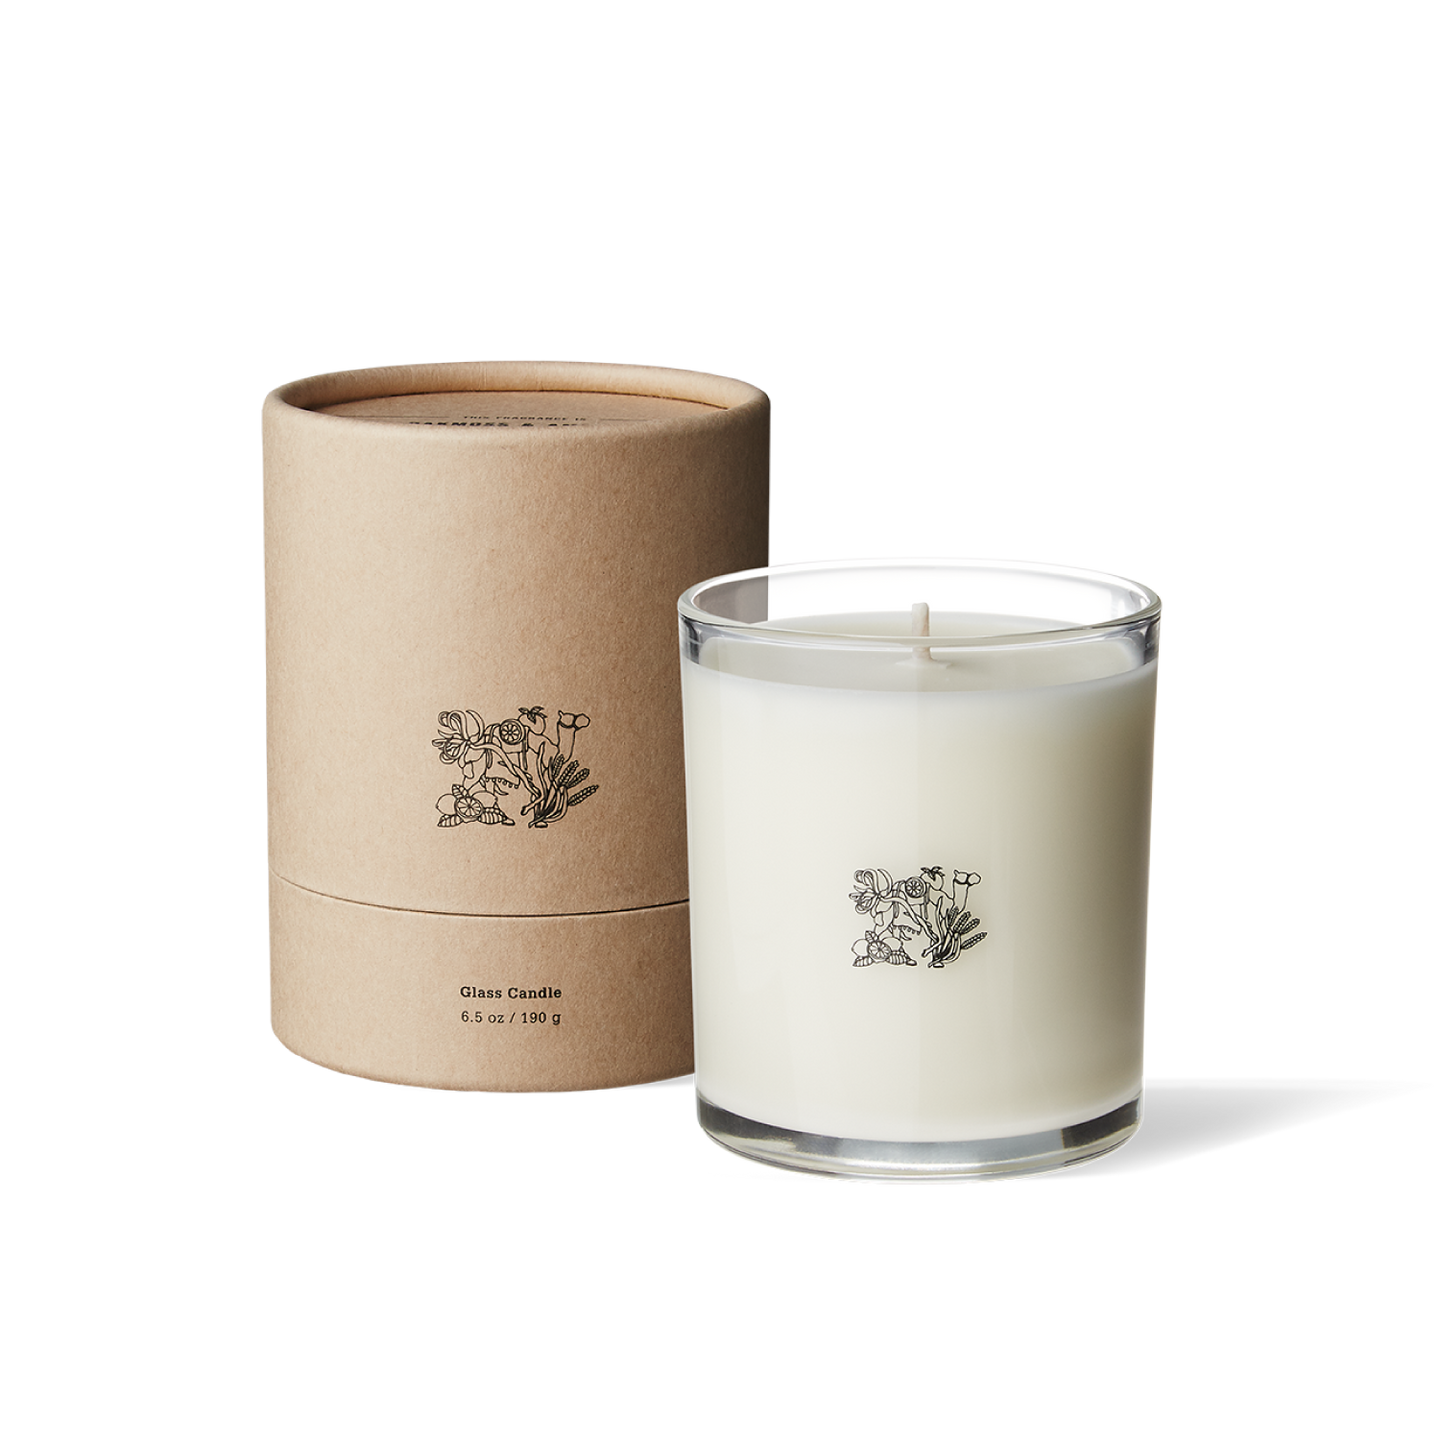 Grass Candle / Blue Hour - Apotheke Fragrance